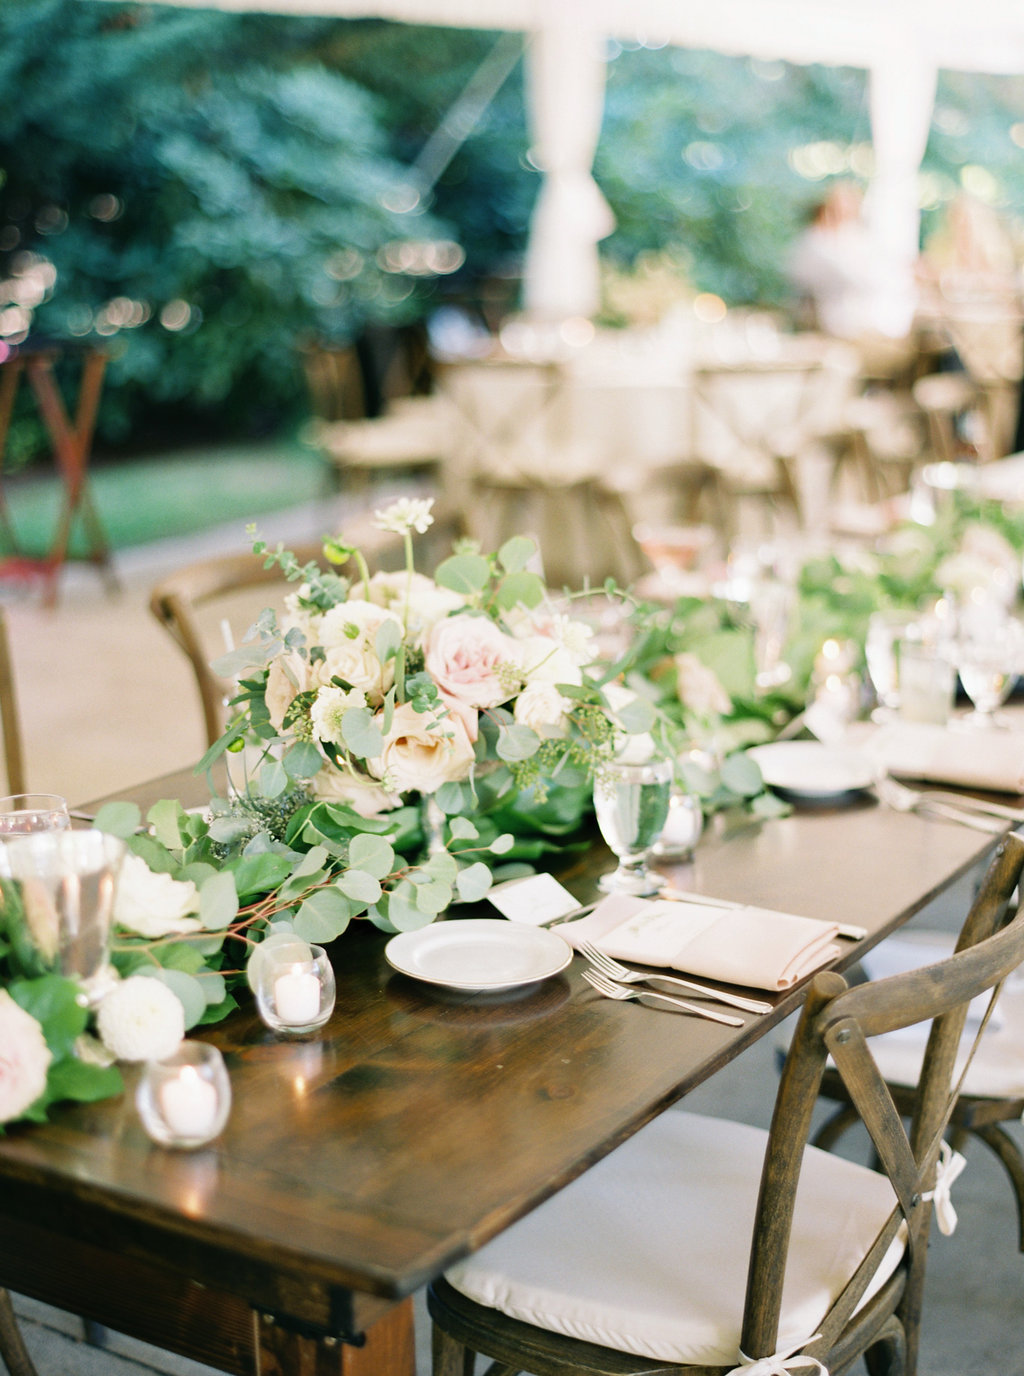 Long wooden wedding reception table, greenery runner with roses tucked into it make for an easy and beautiful centerpiece.